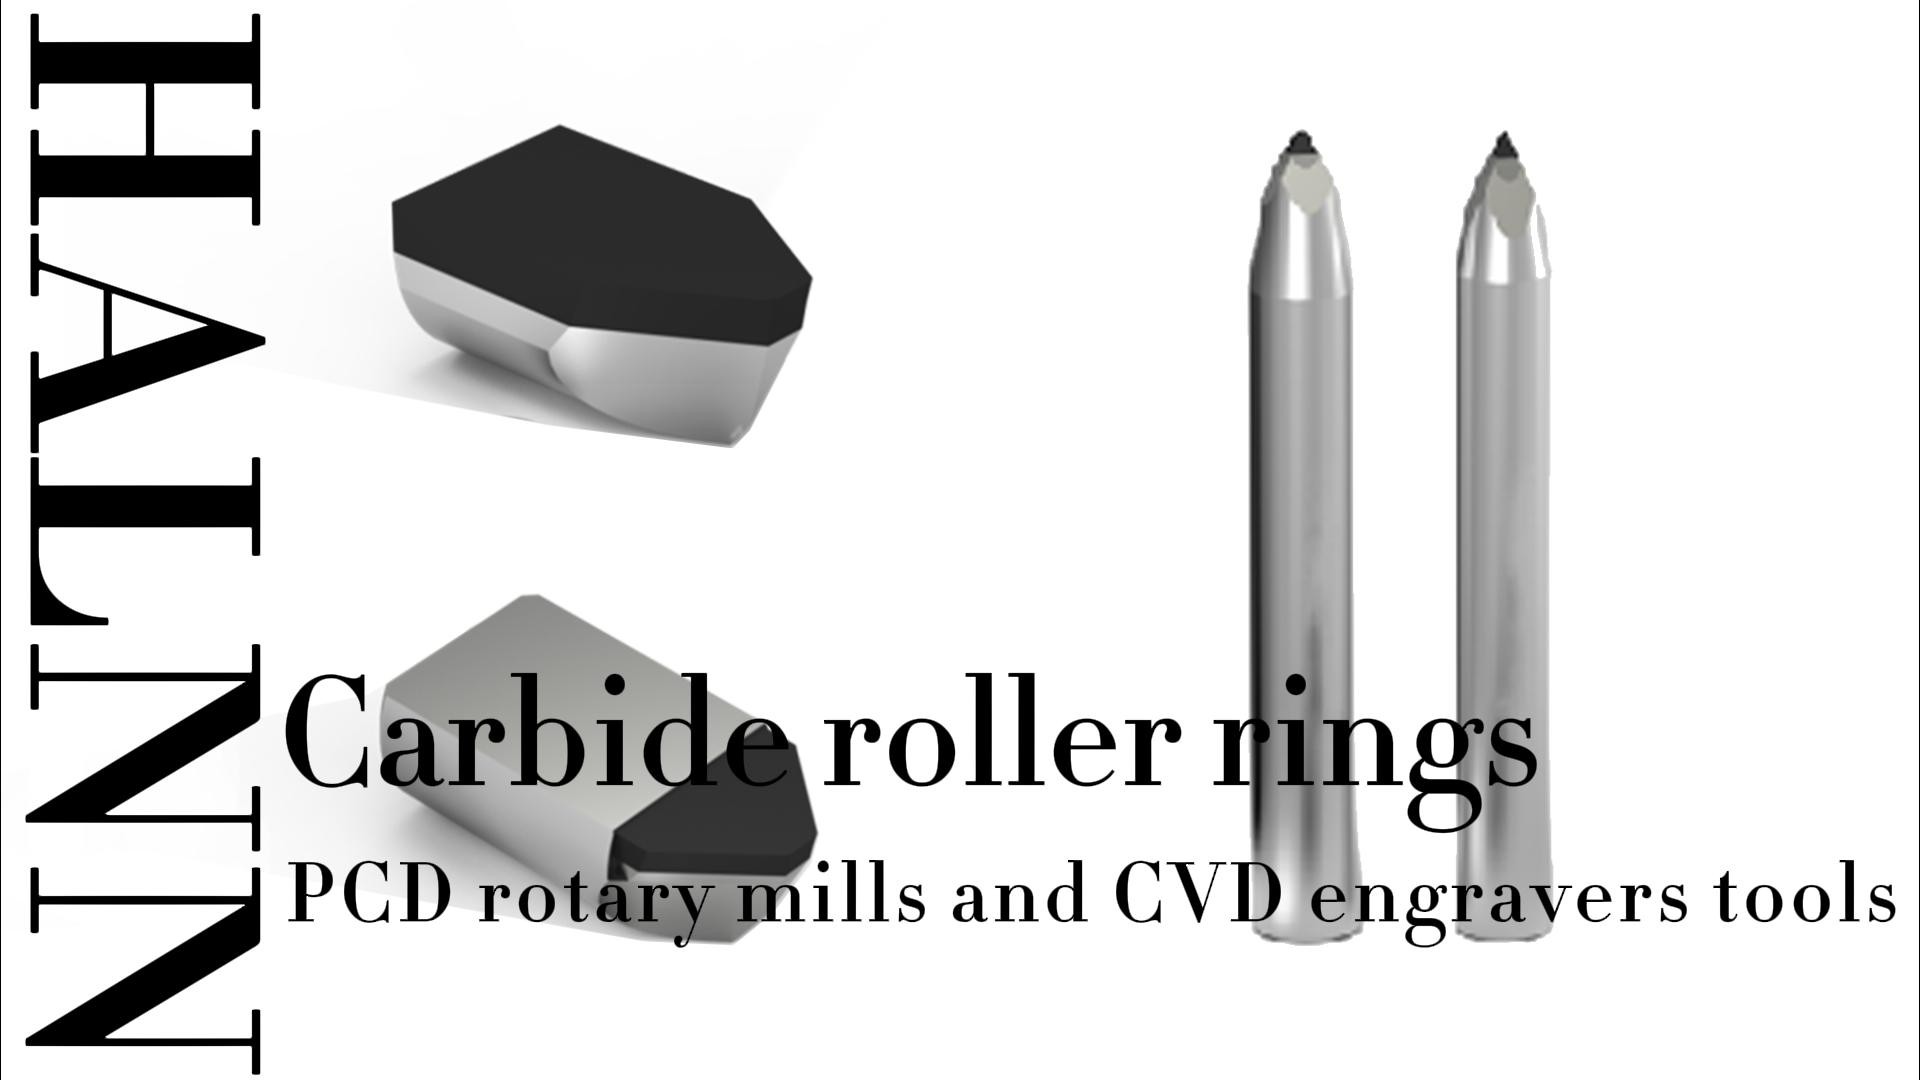 processing carbide roll ring PCD notchining inserts and CVD engraving tools